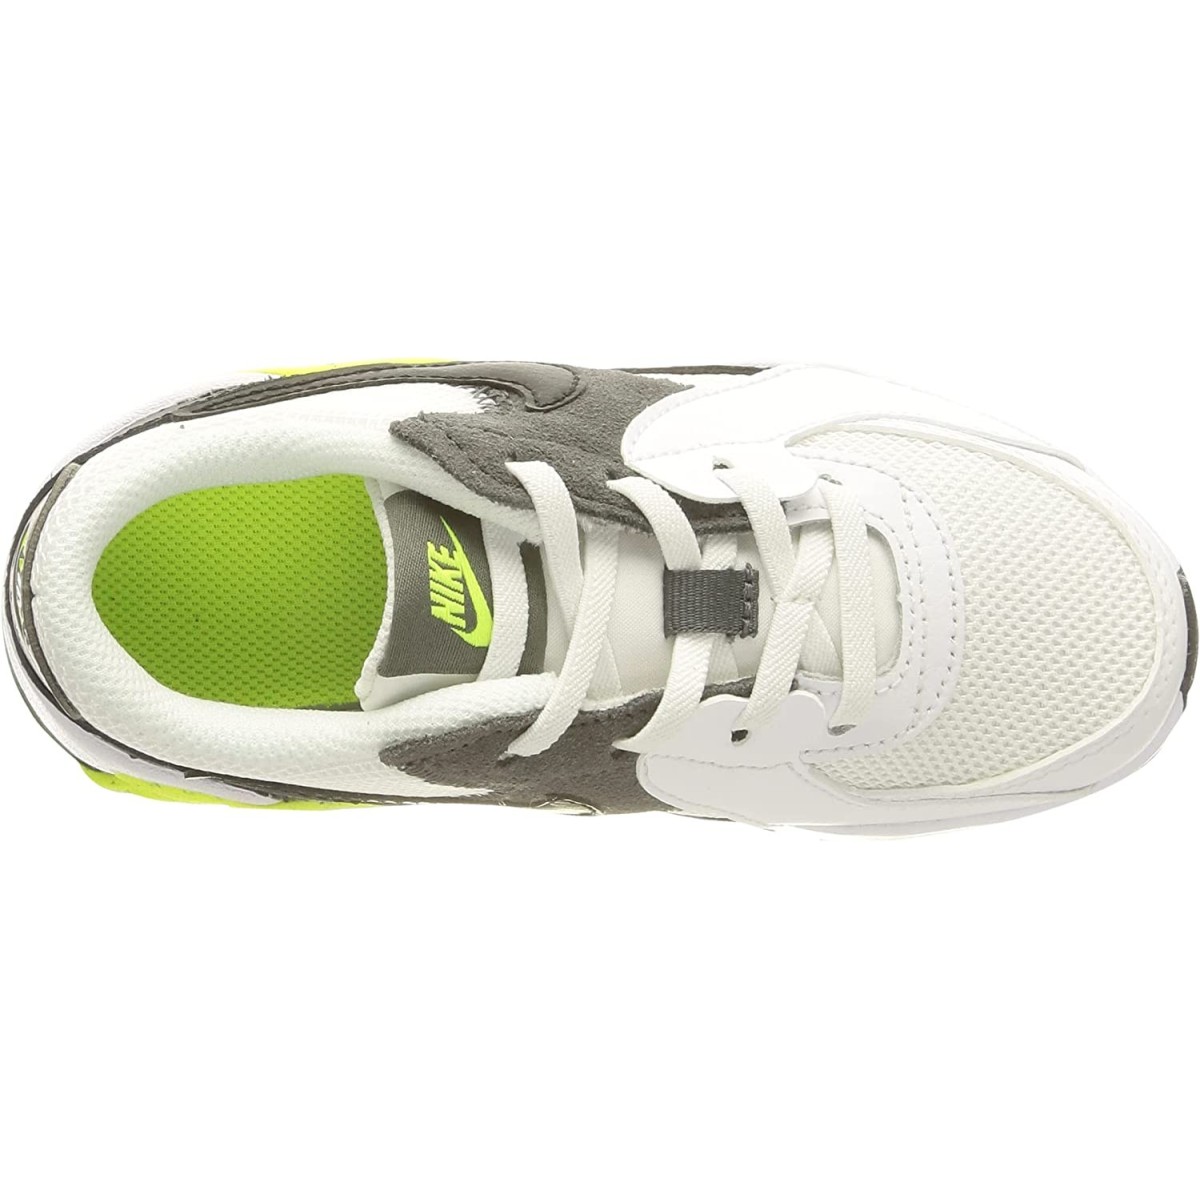 EXCEE white/black-iron AIR CD6892 MAX NIKE (PS) Shoes 110 grey-volt